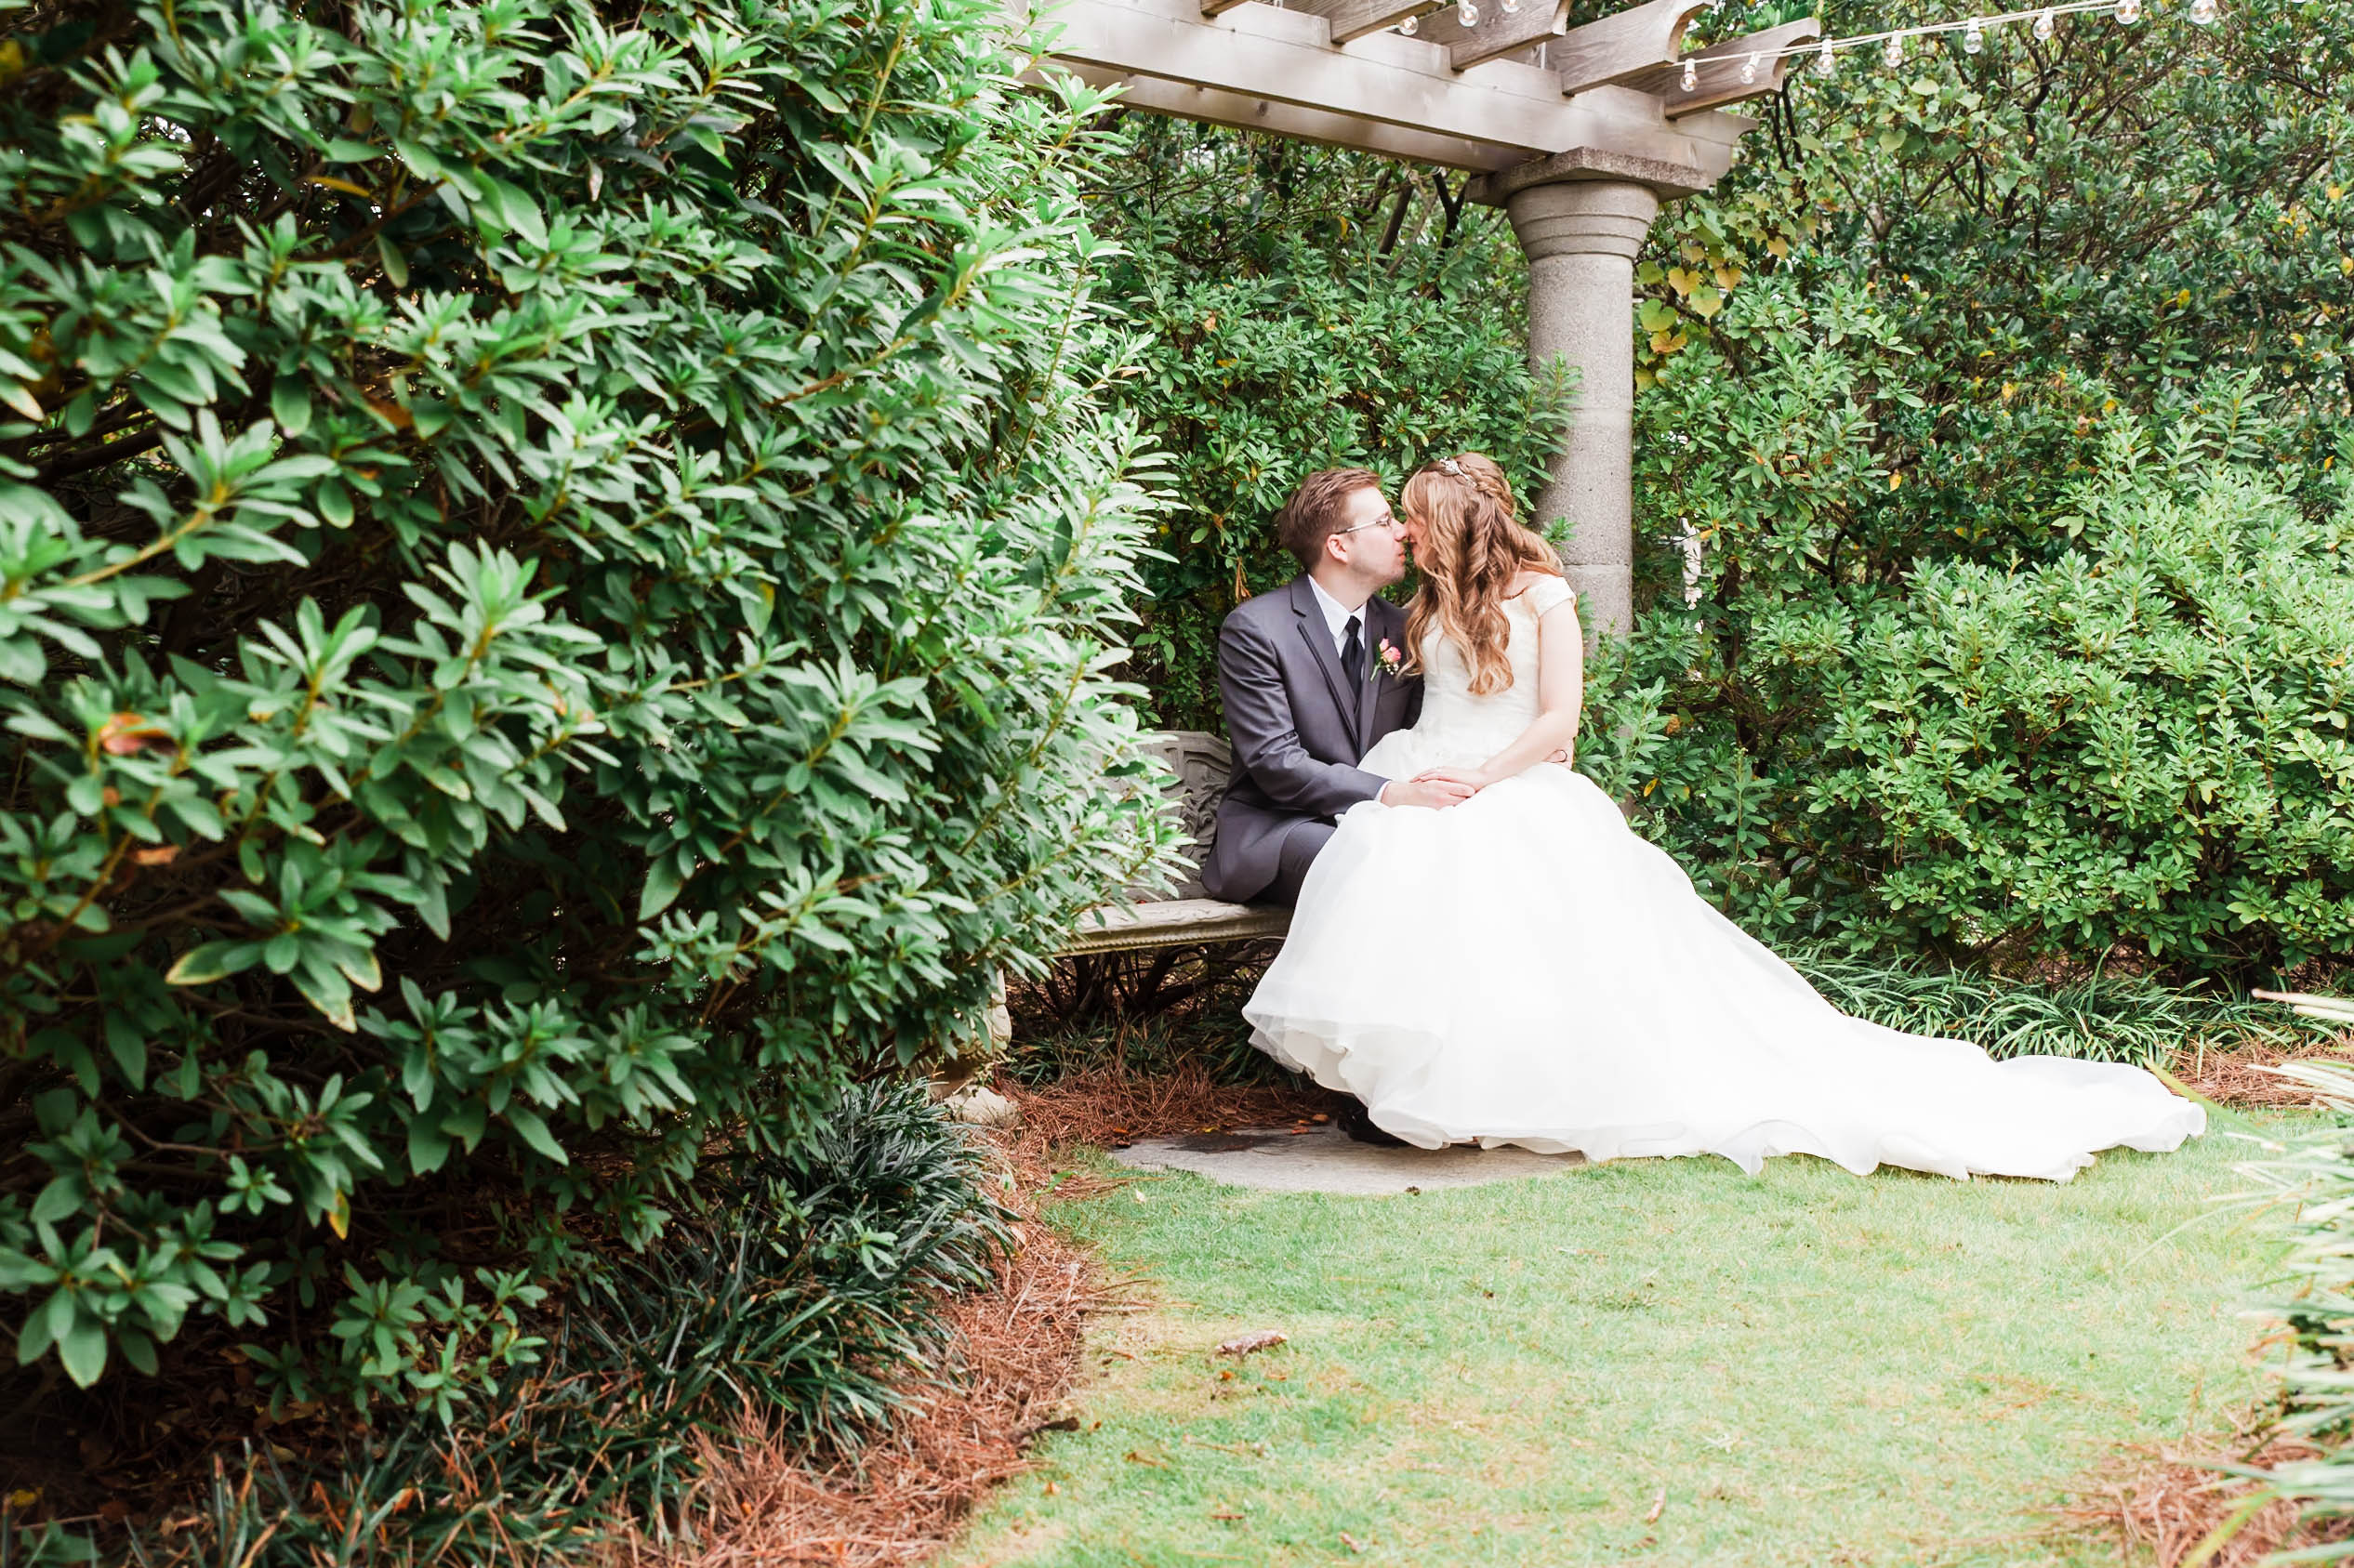 bride and groom kiss at the garden filled with greenery